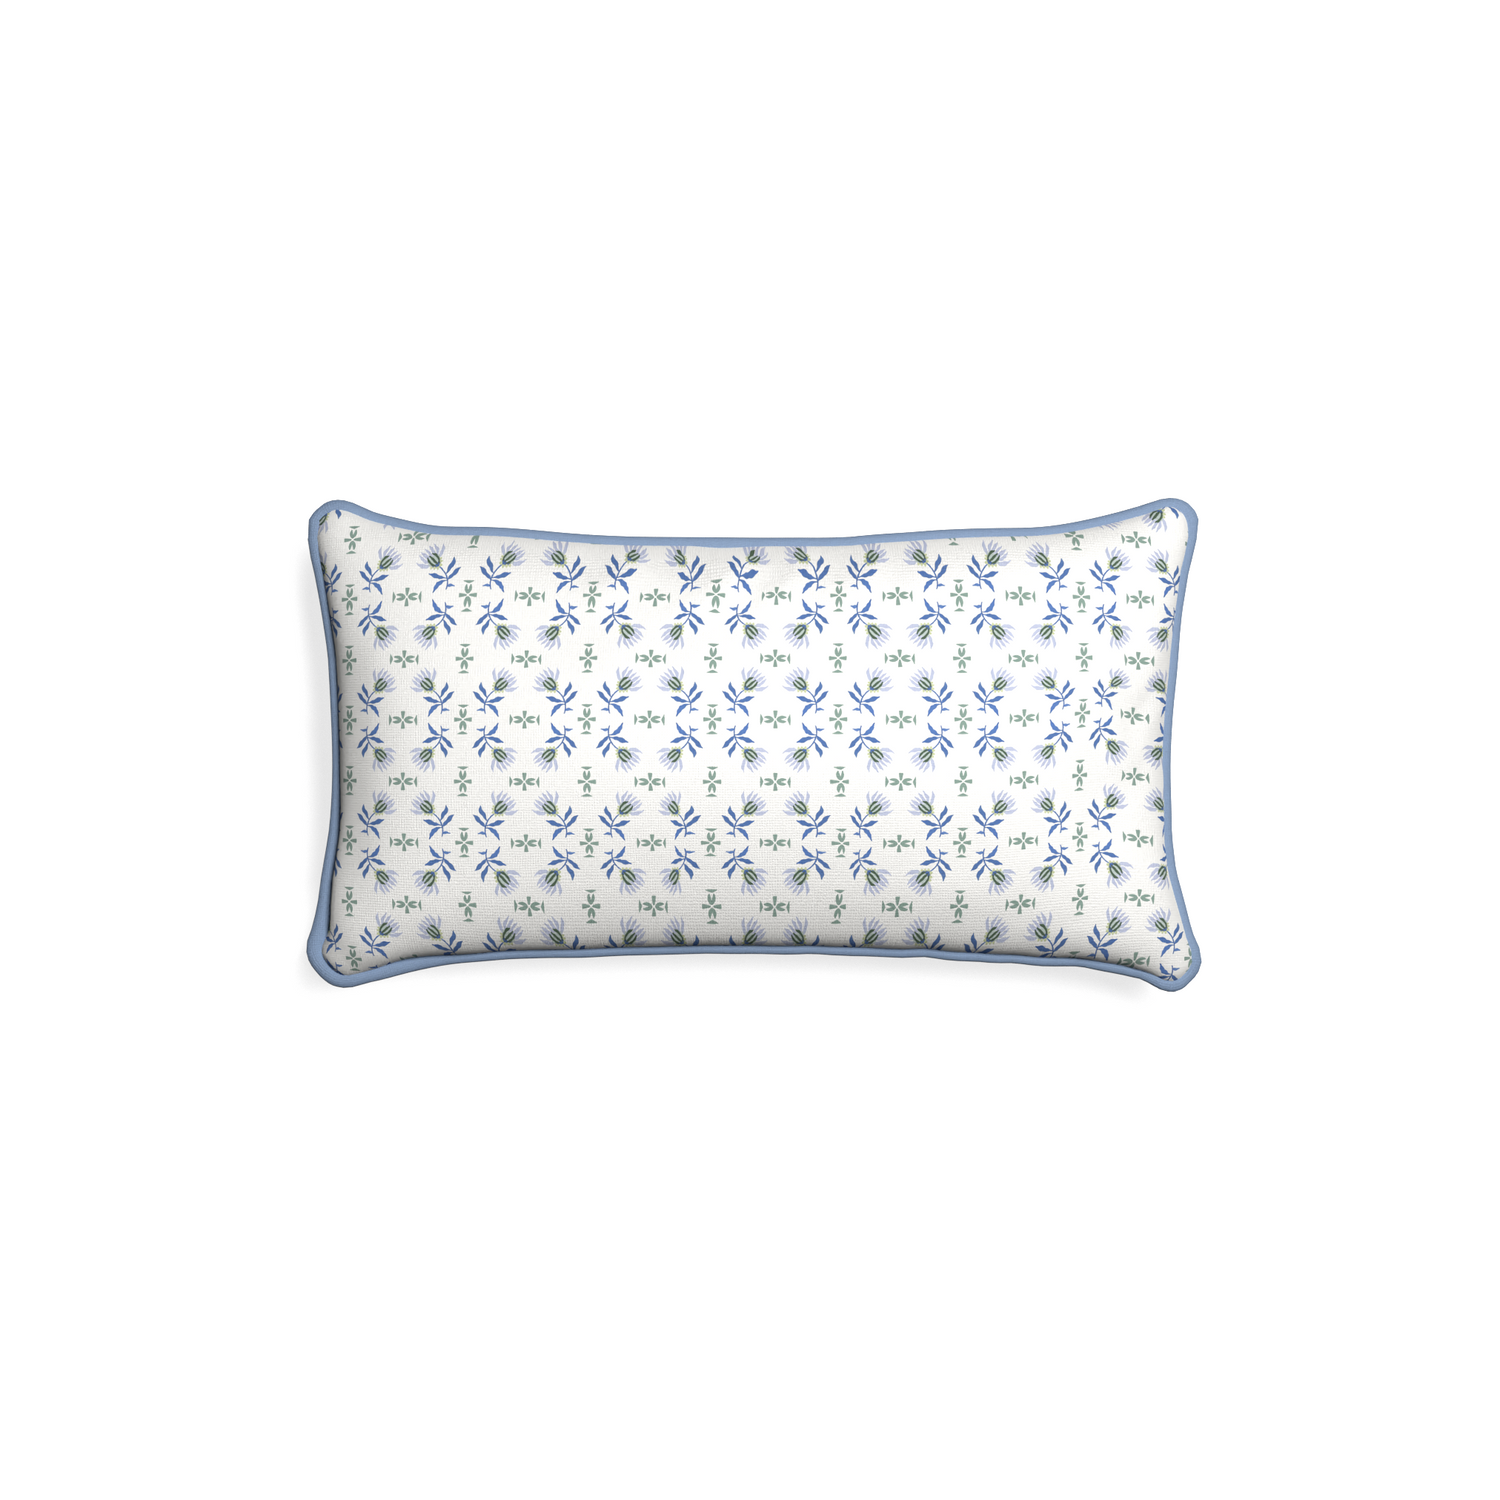 Petite-lumbar lee custom blue & green floralpillow with sky piping on white background